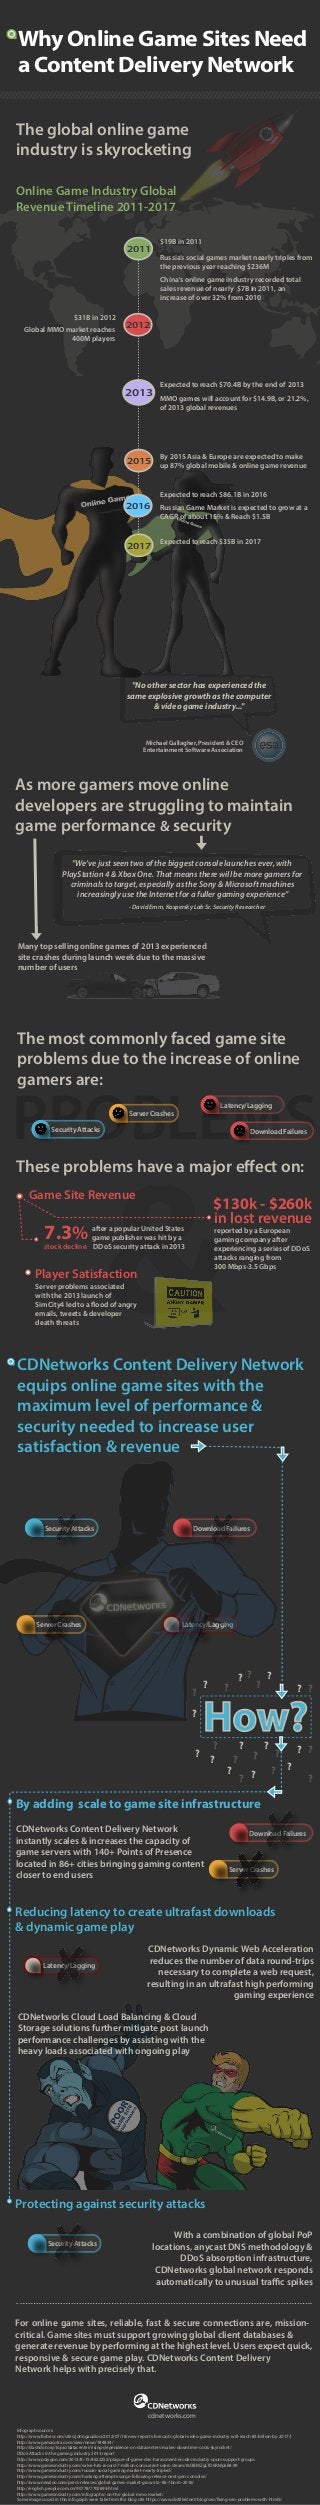 Why Online Game Sites Need
a Content Delivery Network
The global online game
industry is skyrocketing
Online Game Industry Global
Revenue Timeline 2011-2017
$19B in 2011

2011

Russia’s social games market nearly triples from
the previous year reaching $236M
China's online game industry recorded total
sales revenue of nearly $7B in 2011, an
increase of over 32% from 2010

$31B in 2012
Global MMO market reaches
400M players

2012

2013

2015

Expected to reach $70.4B by the end of 2013
MMO games will account for $14.9B, or 21.2%,
of 2013 global revenues

By 2015 Asia & Europe are expected to make
up 87% global mobile & online game revenue

Expected to reach $86.1B in 2016

2016

Russian Game Market is expected to grow at a
CAGR of about 15% & Reach $1.5B

2017

Expected to reach $35B in 2017

"No other sector has experienced the
same explosive growth as the computer
& video game industry..."

Michael Gallagher, President & CEO
Entertainment Software Association

As more gamers move online
developers are struggling to maintain
game performance & security
”We’ve just seen two of the biggest console launches ever, with
PlayStation 4 & Xbox One. That means there will be more gamers for
criminals to target, especially as the Sony & Microsoft machines
increasingly use the Internet for a fuller gaming experience”
- David Emm, Kaspersky Lab Sr. Security Researcher

Many top selling online games of 2013 experienced
site crashes during launch week due to the massive
number of users

The most commonly faced game site
problems due to the increase of online
gamers are:

PROBLEMS
Latency/Lagging

Server Crashes

Security Attacks

Download Failures

&

These problems have a major effect on:
Game Site Revenue

7.3%

$130k - $260k
in lost revenue

after a popular United States
game publisher was hit by a
stock decline DDoS security attack in 2013

reported by a European
gaming company after
experiencing a series of DDoS
attacks ranging from
300 Mbps-3.5 Gbps

Player Satisfaction
Server problems associated
with the 2013 launch of
SimCity4 led to a flood of angry
emails, tweets & developer
death threats

CDNetworks Content Delivery Network
equips online game sites with the
maximum level of performance &
security needed to increase user
satisfaction & revenue

Security Attacks

Server Crashes

Download Failures

Latency/Lagging

?
?

?

? ?

?

?

?

? ?

How?

?
?
?

?

?

?

?

? ?

?

?
?

? ?
?

?

By adding scale to game site infrastructure
CDNetworks Content Delivery Network
instantly scales & increases the capacity of
game servers with 140+ Points of Presence
located in 86+ cities bringing gaming content
closer to end users

Download Failures

Server Crashes

Reducing latency to create ultrafast downloads
& dynamic game play
Latency/Lagging

CDNetworks Dynamic Web Acceleration
reduces the number of data round-trips
necessary to complete a web request,
resulting in an ultrafast high performing
gaming experience

CDNetworks Cloud Load Balancing & Cloud
Storage solutions further mitigate post launch
performance challenges by assisting with the
heavy loads associated with ongoing play

Protecting against security attacks
Security Attacks

With a combination of global PoP
locations, anycast DNS methodology &
DDoS absorption infrastructure,
CDNetworks global network responds
automatically to unusual traffic spikes

For online game sites, reliable, fast & secure connections are, missioncritical. Game sites must support growing global client databases &
generate revenue by performing at the highest level. Users expect quick,
responsive & secure game play. CDNetworks Content Delivery
Network helps with precisely that.

cdnetworks.com
Infograph sources:
http://www.forbes.com/sites/johngaudiosi/2012/07/18/new-reports-forecasts-global-video-game-industry-will-reach-82-billion-by-2017/)
http://www.gamasutra.com/view/news/184834/
http://slashdot.org/topic/datacenter/rising-dependence-on-datacenters-makes-downtime-costs-skyrocket/
DDoS Attacks in the gaming industry 2013 report
http://www.polygon.com/2013/8/15/4622252/plague-of-game-dev-harassment-erodes-industry-spurs-support-groups
http://www.gamesindustry.com/valve-hits-record-7-million-concurrent-users-steam/#cOBMZgLTO6RMp5B4.99
http://www.gamesindustry.com/russian-social-gaming-market-nearly-tripled/
http://www.gamesindustry.com/hacking-attempts-surge-following-release-next-gen-consoles/
http://www.newzoo.com/press-releases/global-games-market-grows-to-86-1bn-in-2016/
http://english.people.com.cn/90778/7702699.html
http://www.gamesindustry.com/infographic-on-the-global-mmo-market/
Some images used in this infograph were take from the blog site https://www.distilled.net/blog/seo/fixing-seo-problems-with-html5/

 